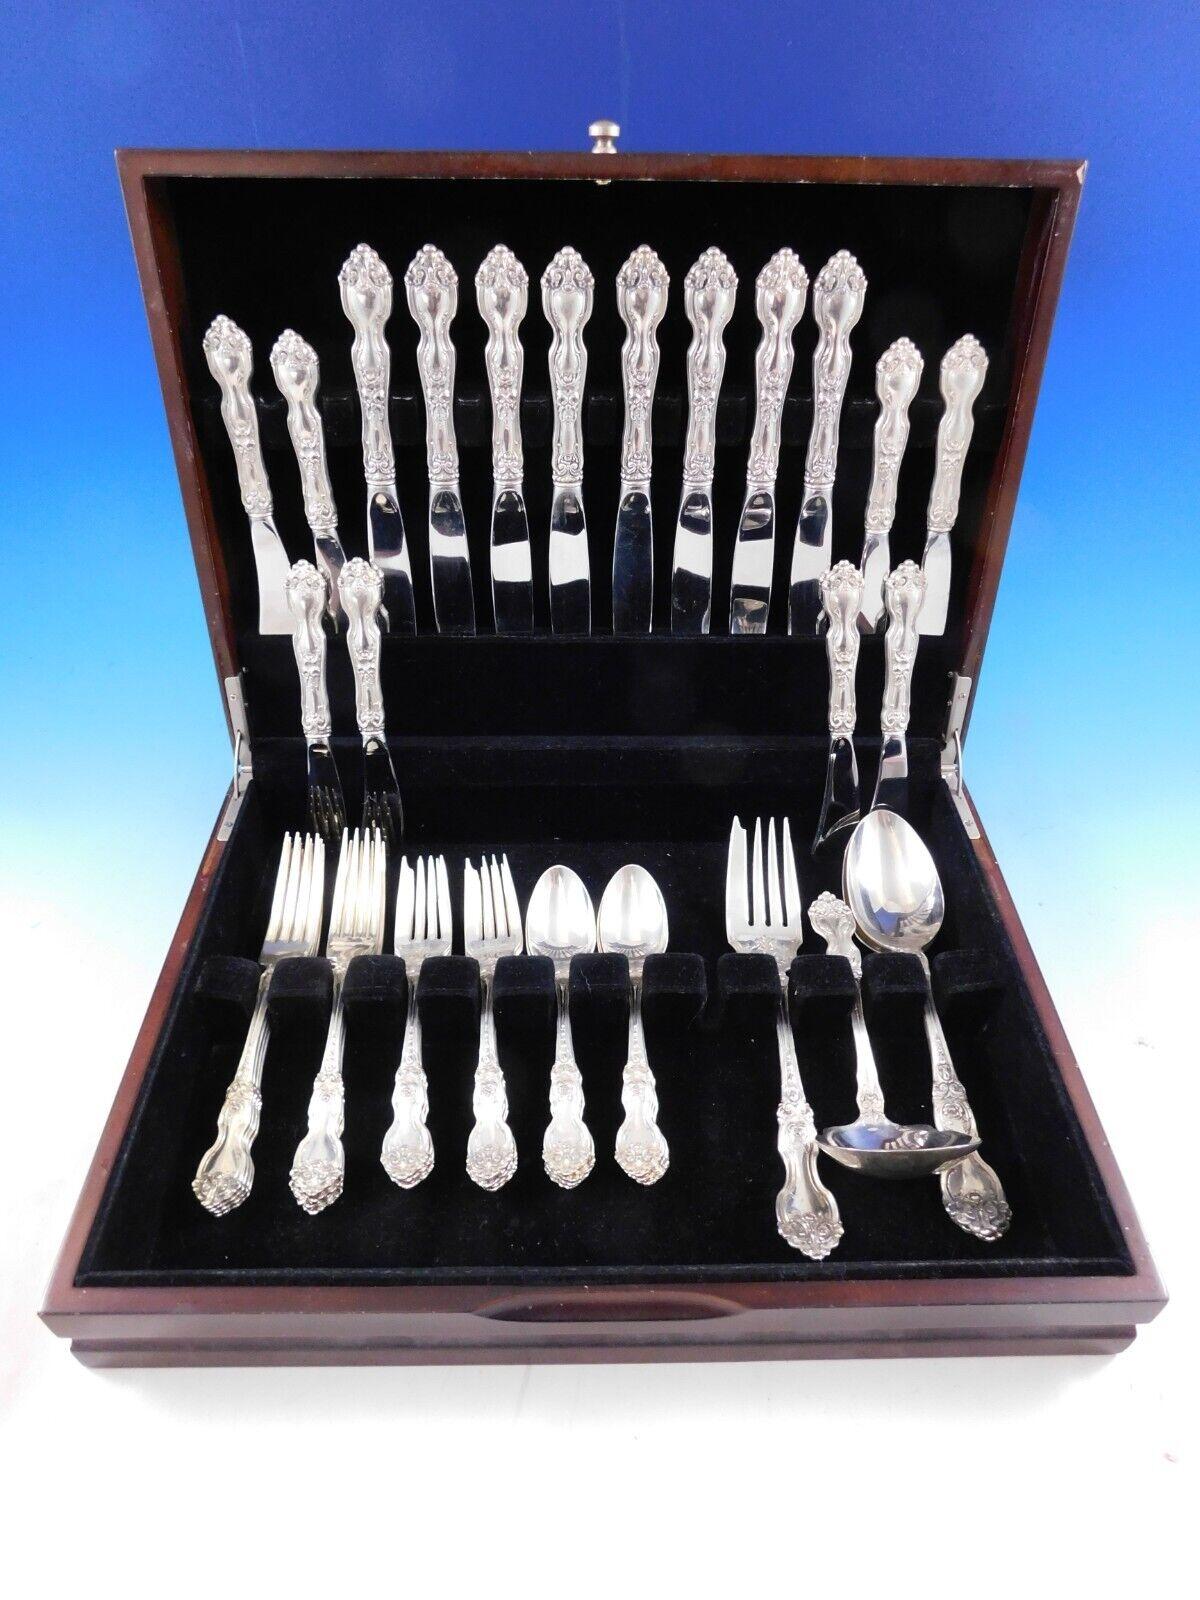 Heirloom quality La Reine by Wallace sterling silver Flatware set, 44 pieces. This set includes:

8 Knives, 9